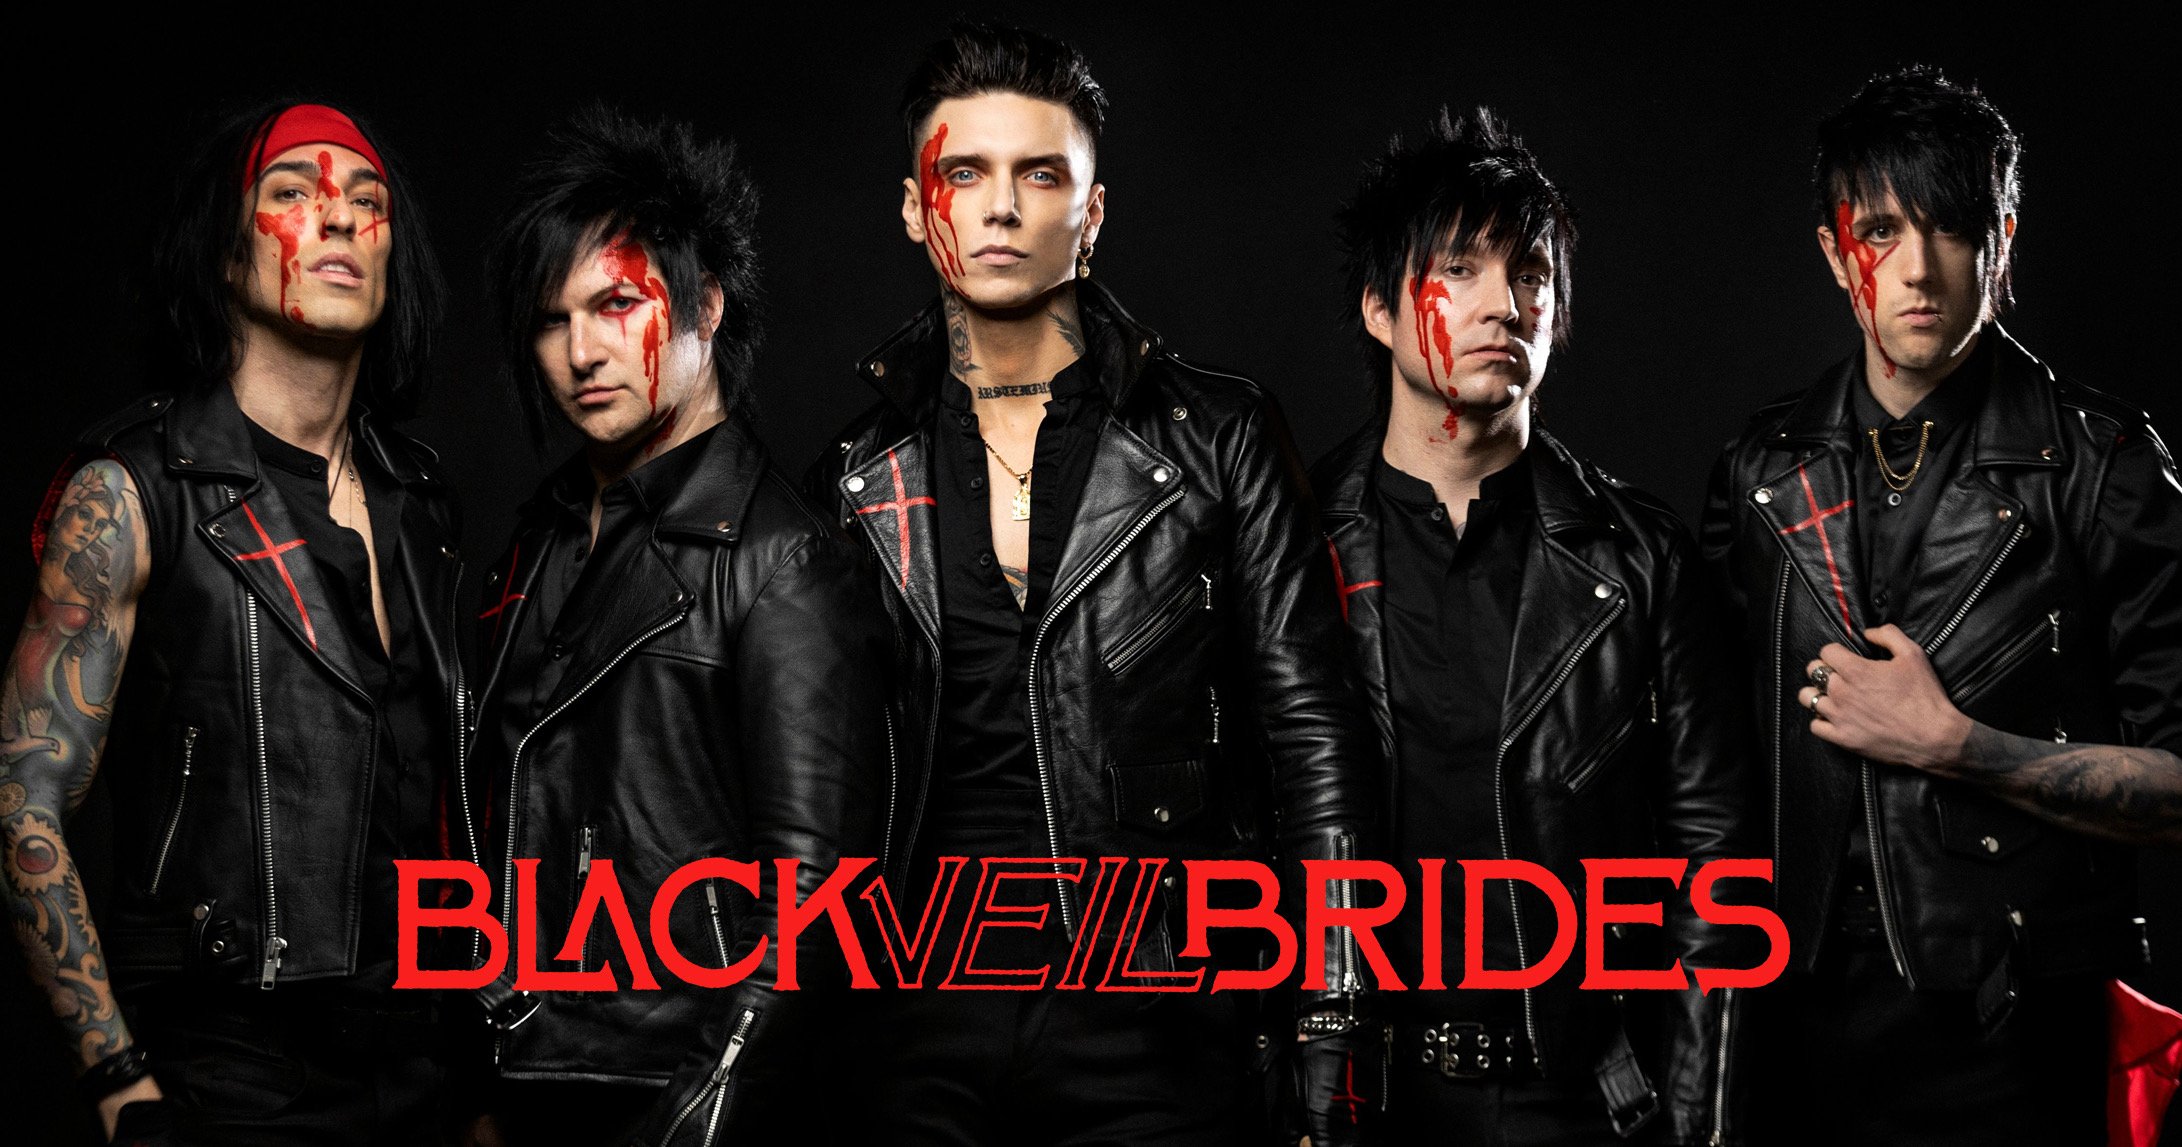 BLACK VEIL BRIDES Andy Biersack On Ushering In A New Era With ‘The